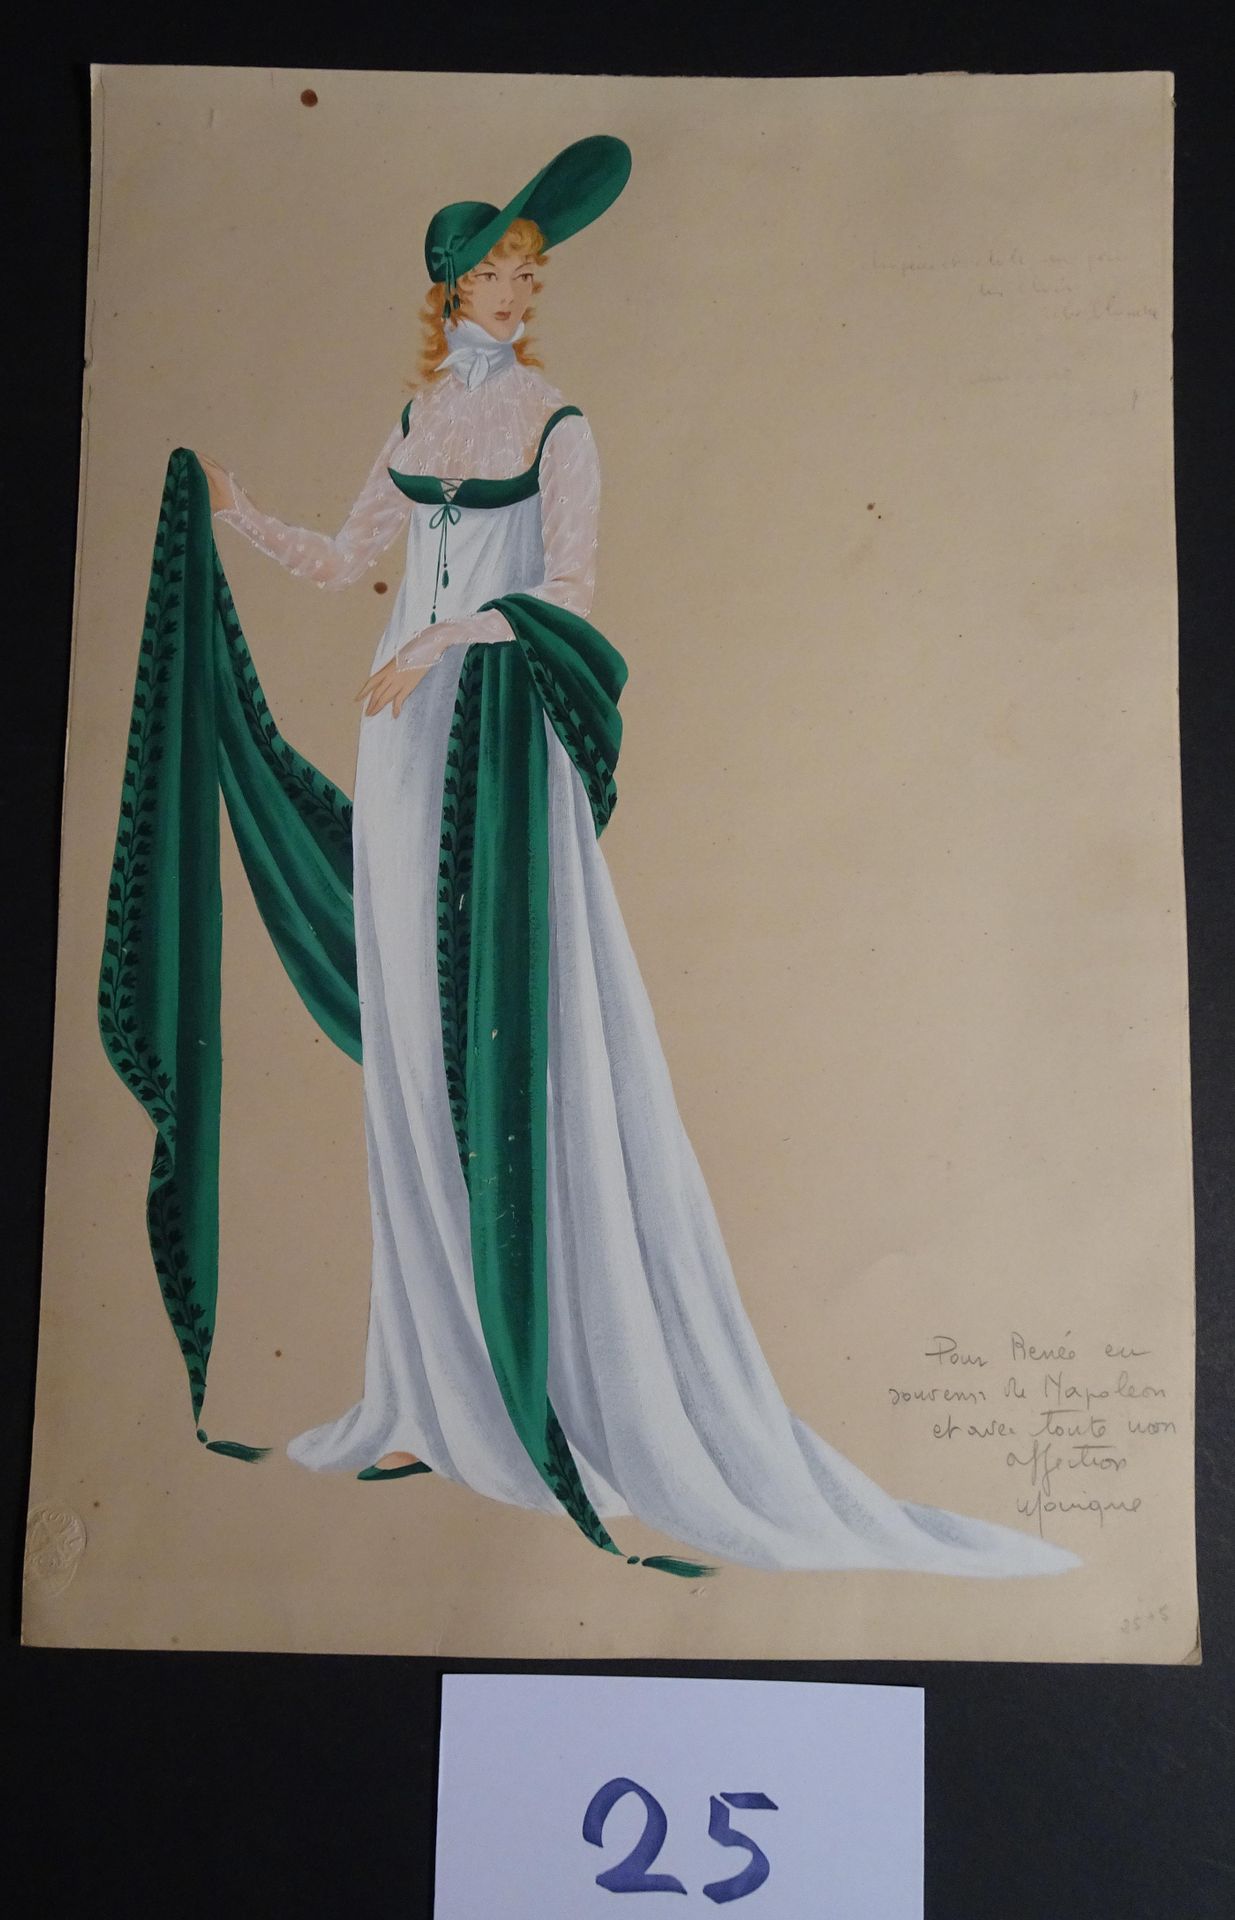 DUNAND DUNAND MONIQUE ( 1924-2002 )

"Napoleon" by Sacha Guitry c.1955. Dress cr&hellip;